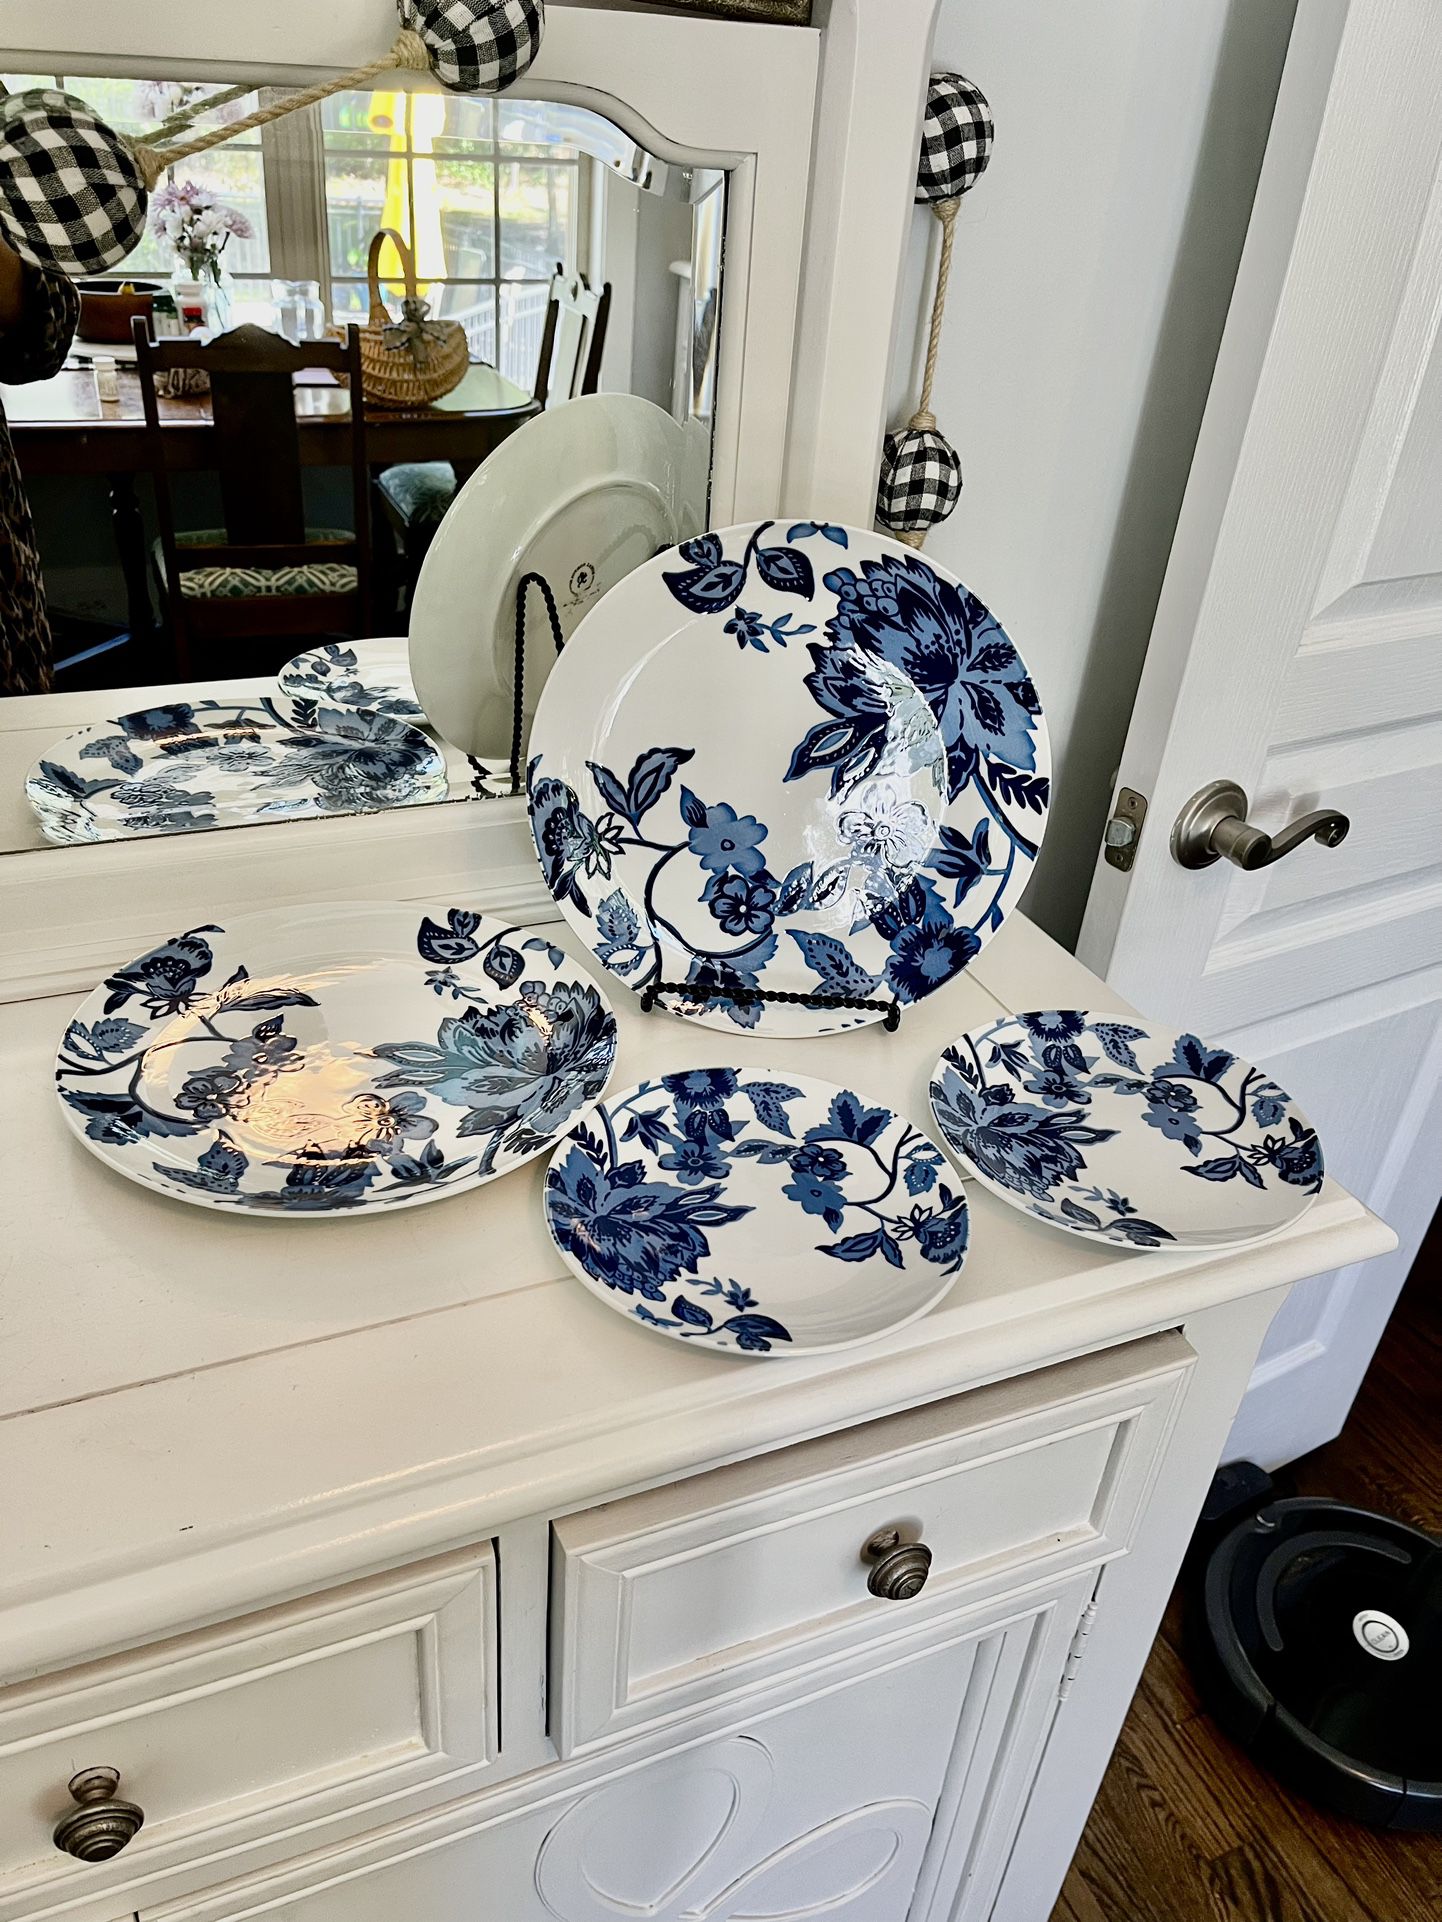 Set of georgeous blue and white floral plates, 2 dinner and 2 salad. Embossed print. New condition.